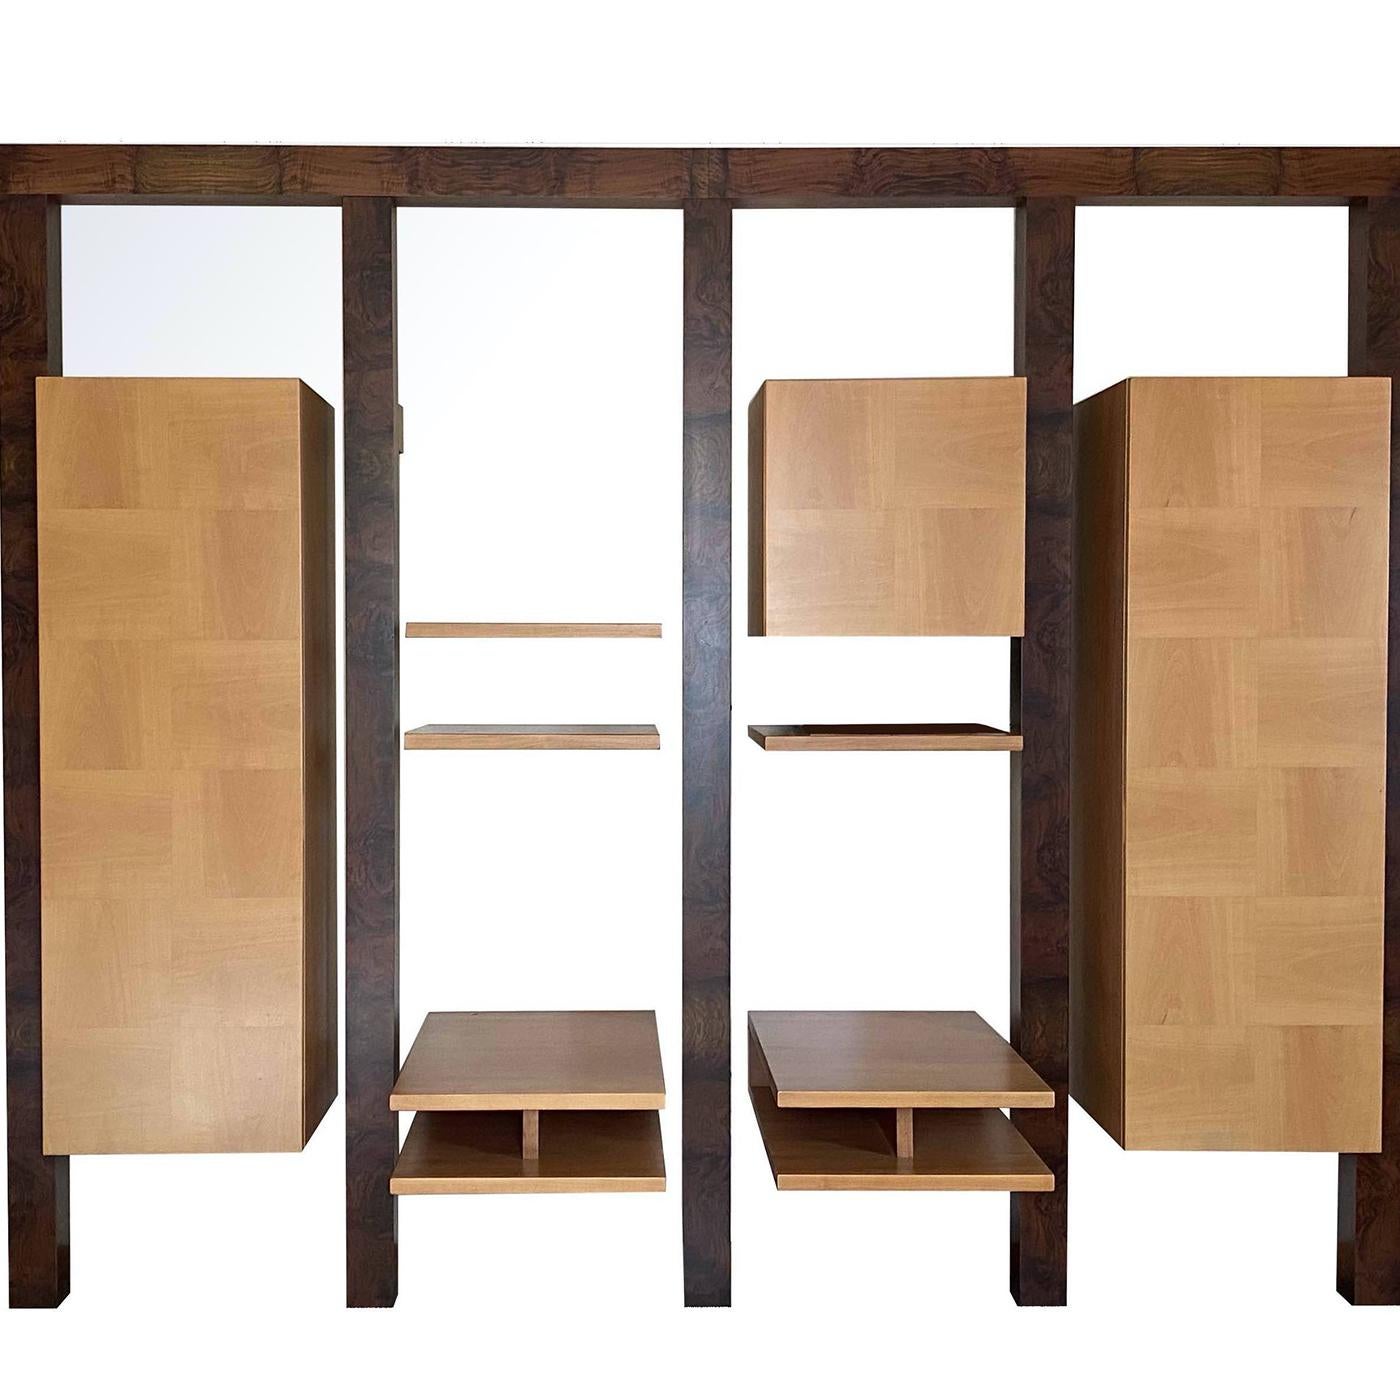 This multi-purpose storage unit by Ferdinando Meccani boasts a walnut briar frame. The design features two large cupboards, one small cupboard, and a selection of shelves, all crafted from solid pear wood. The doors are distinguished by a stylish